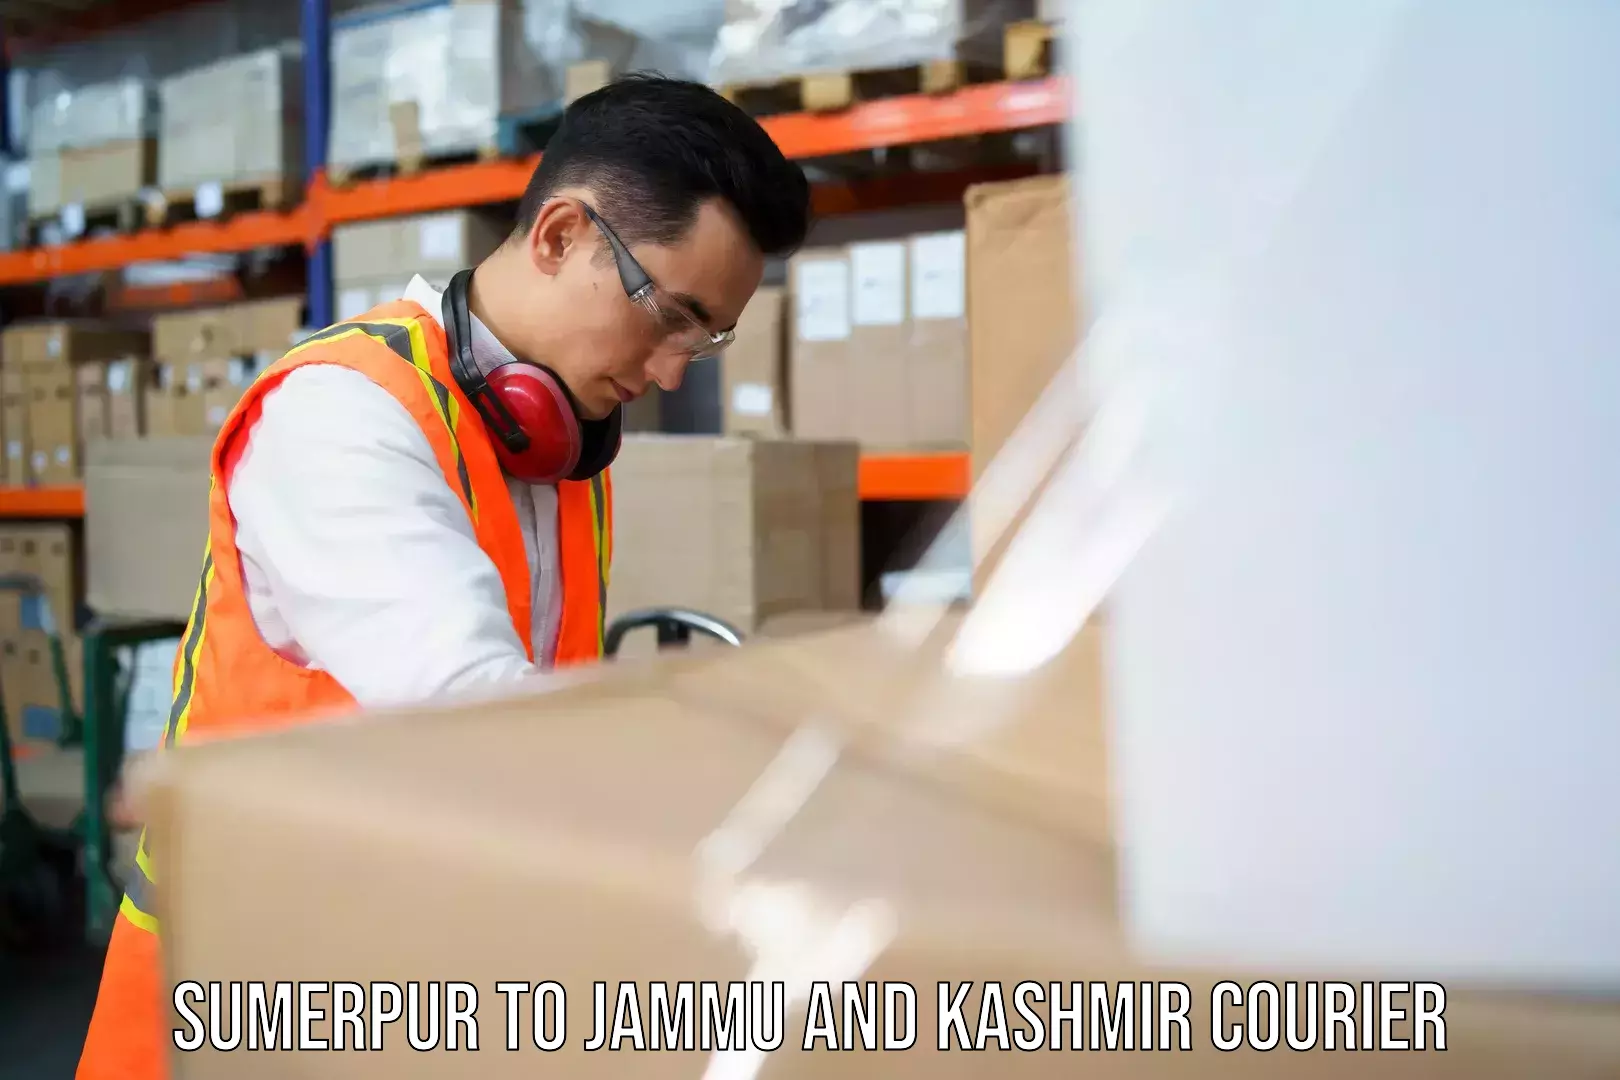 Quality courier partnerships Sumerpur to Jammu and Kashmir